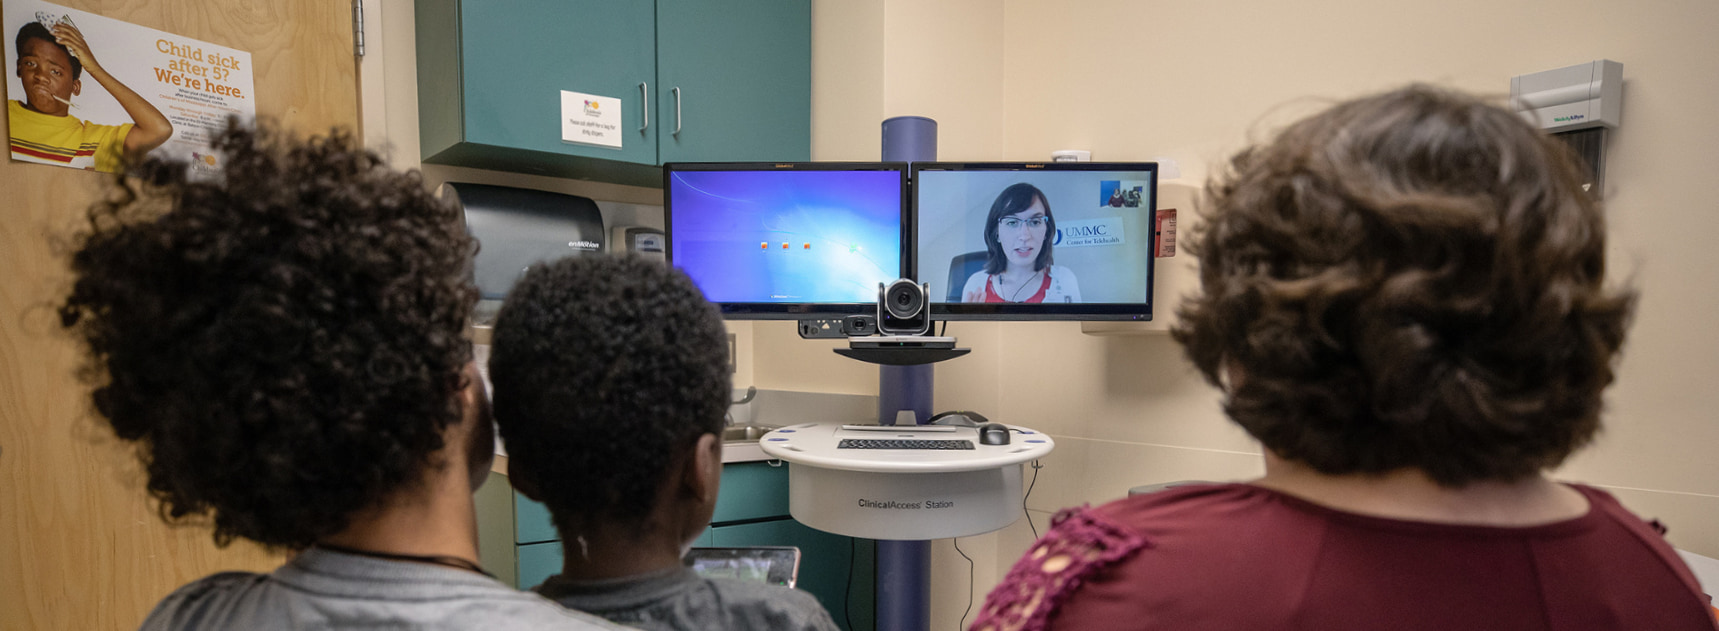 Two children and their mother visit a telehealth provider.